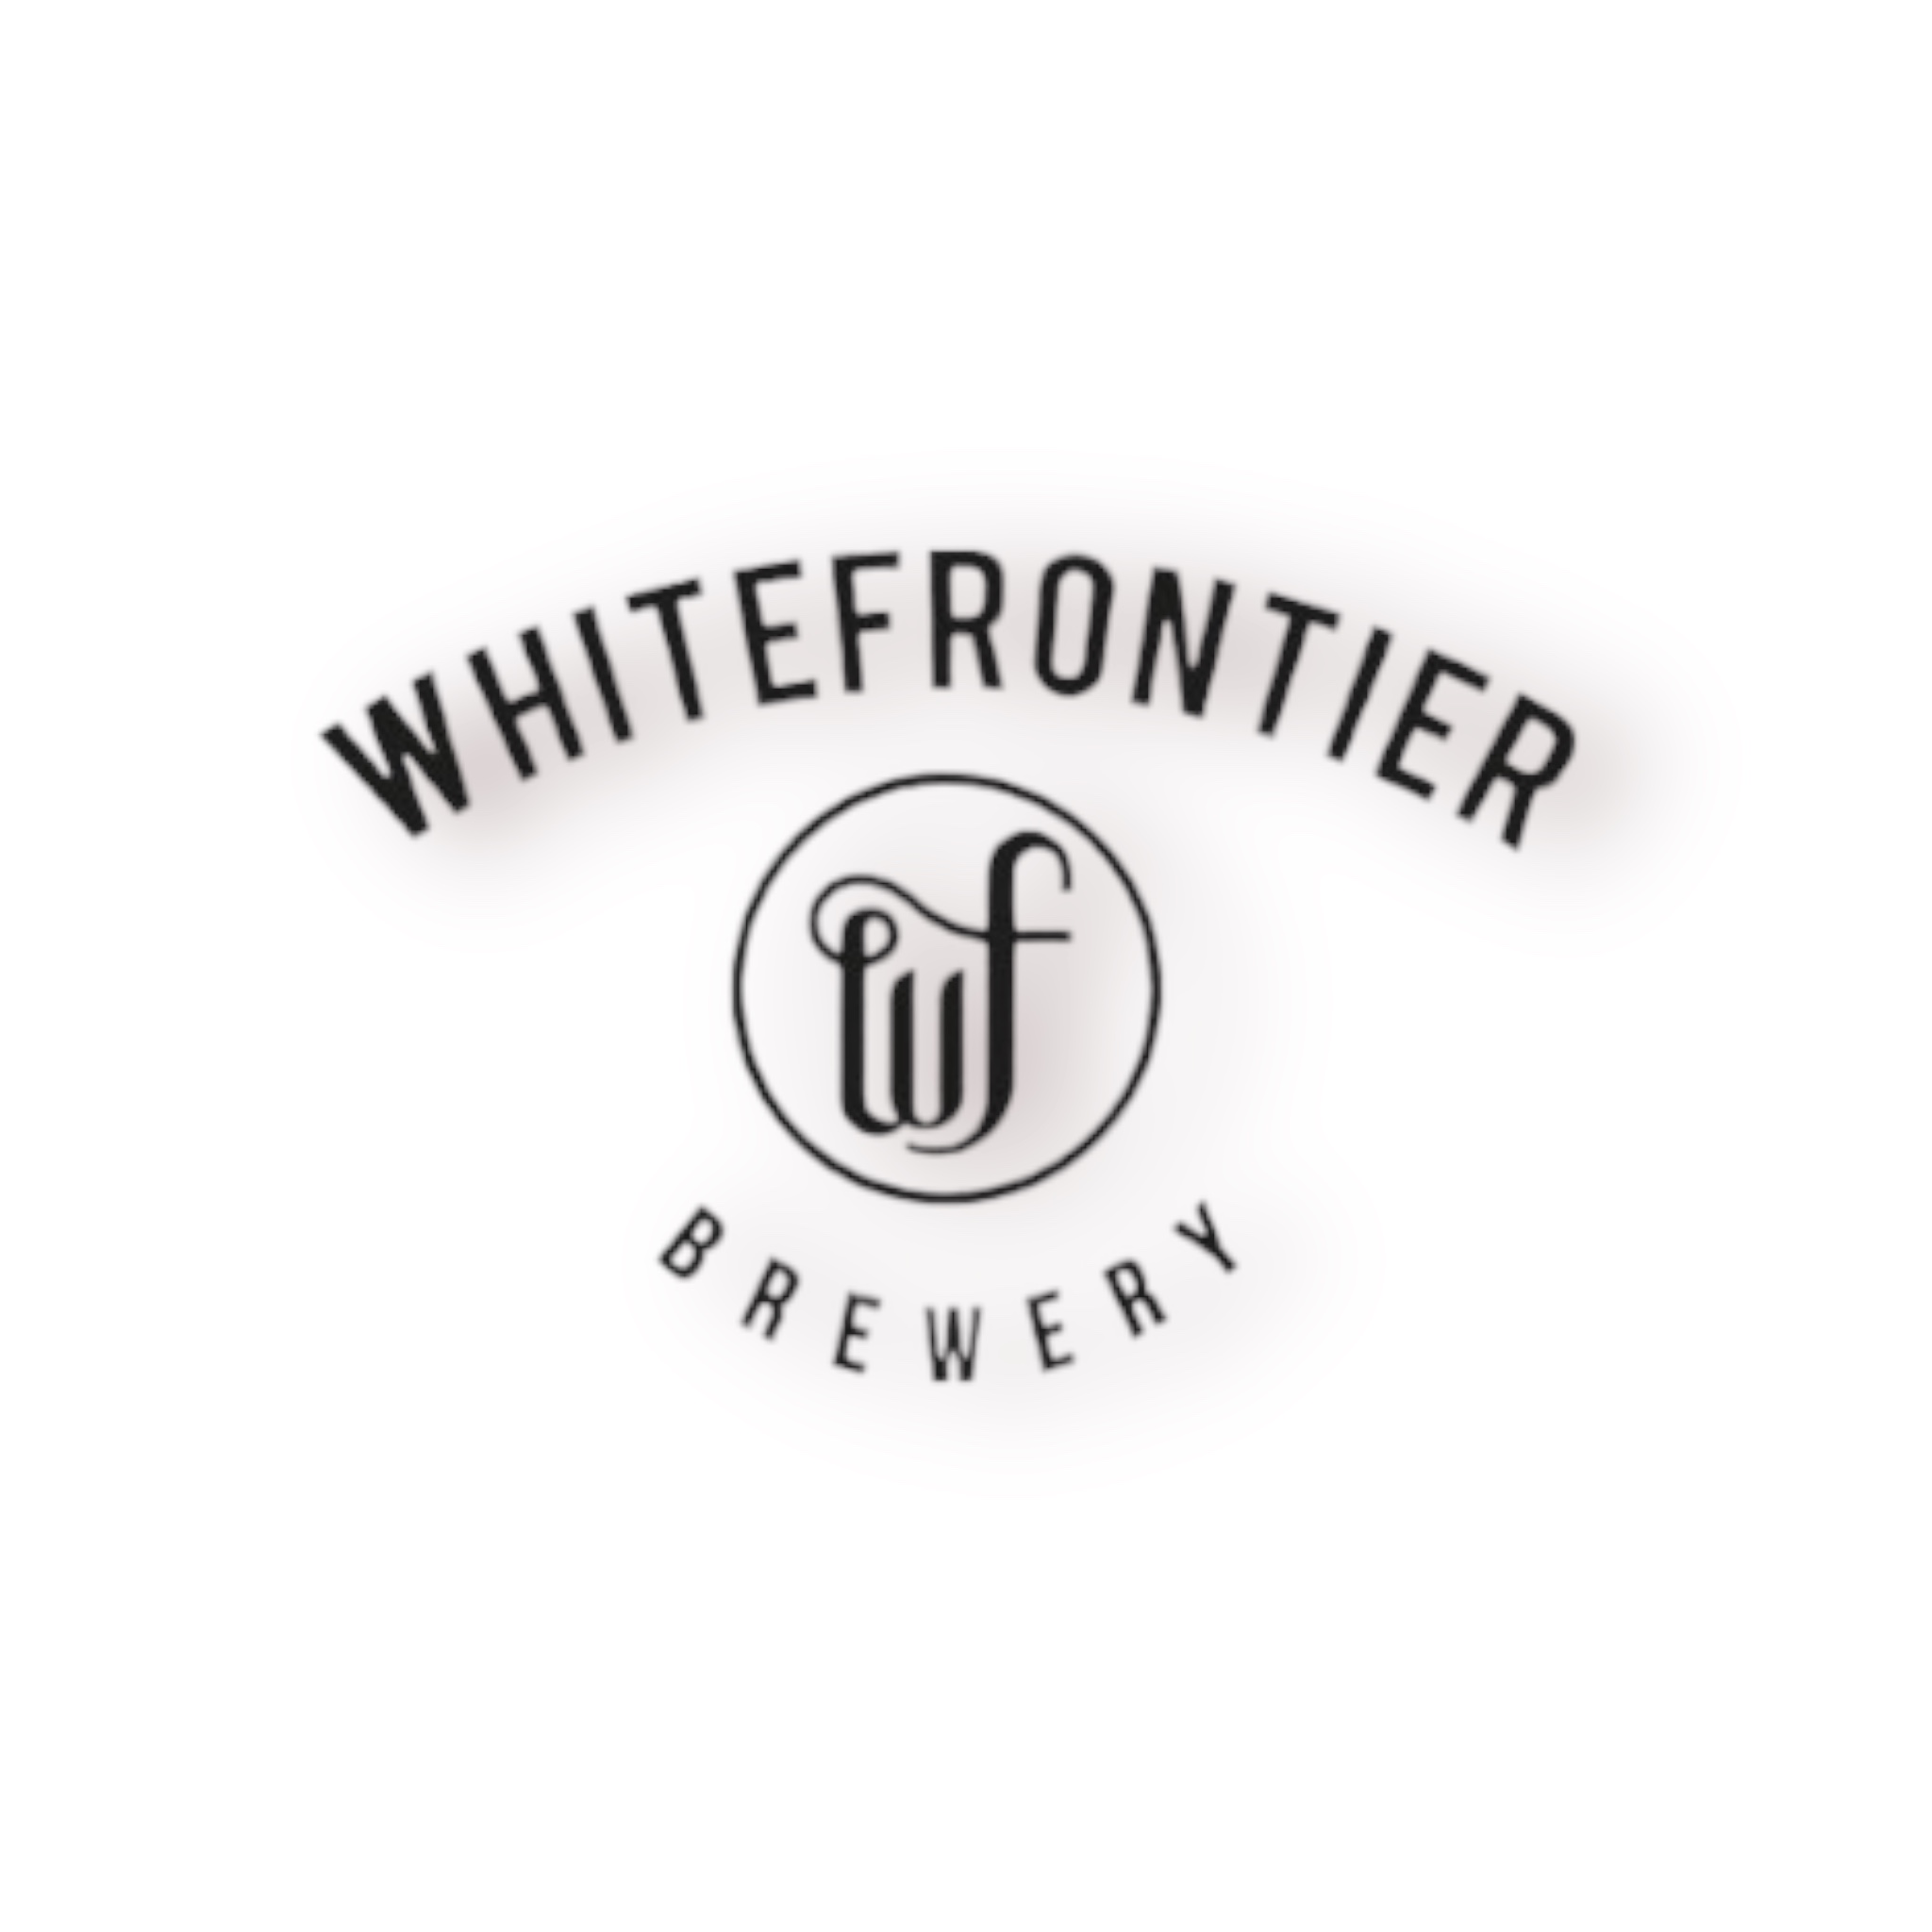 Whitefrontier Brewery